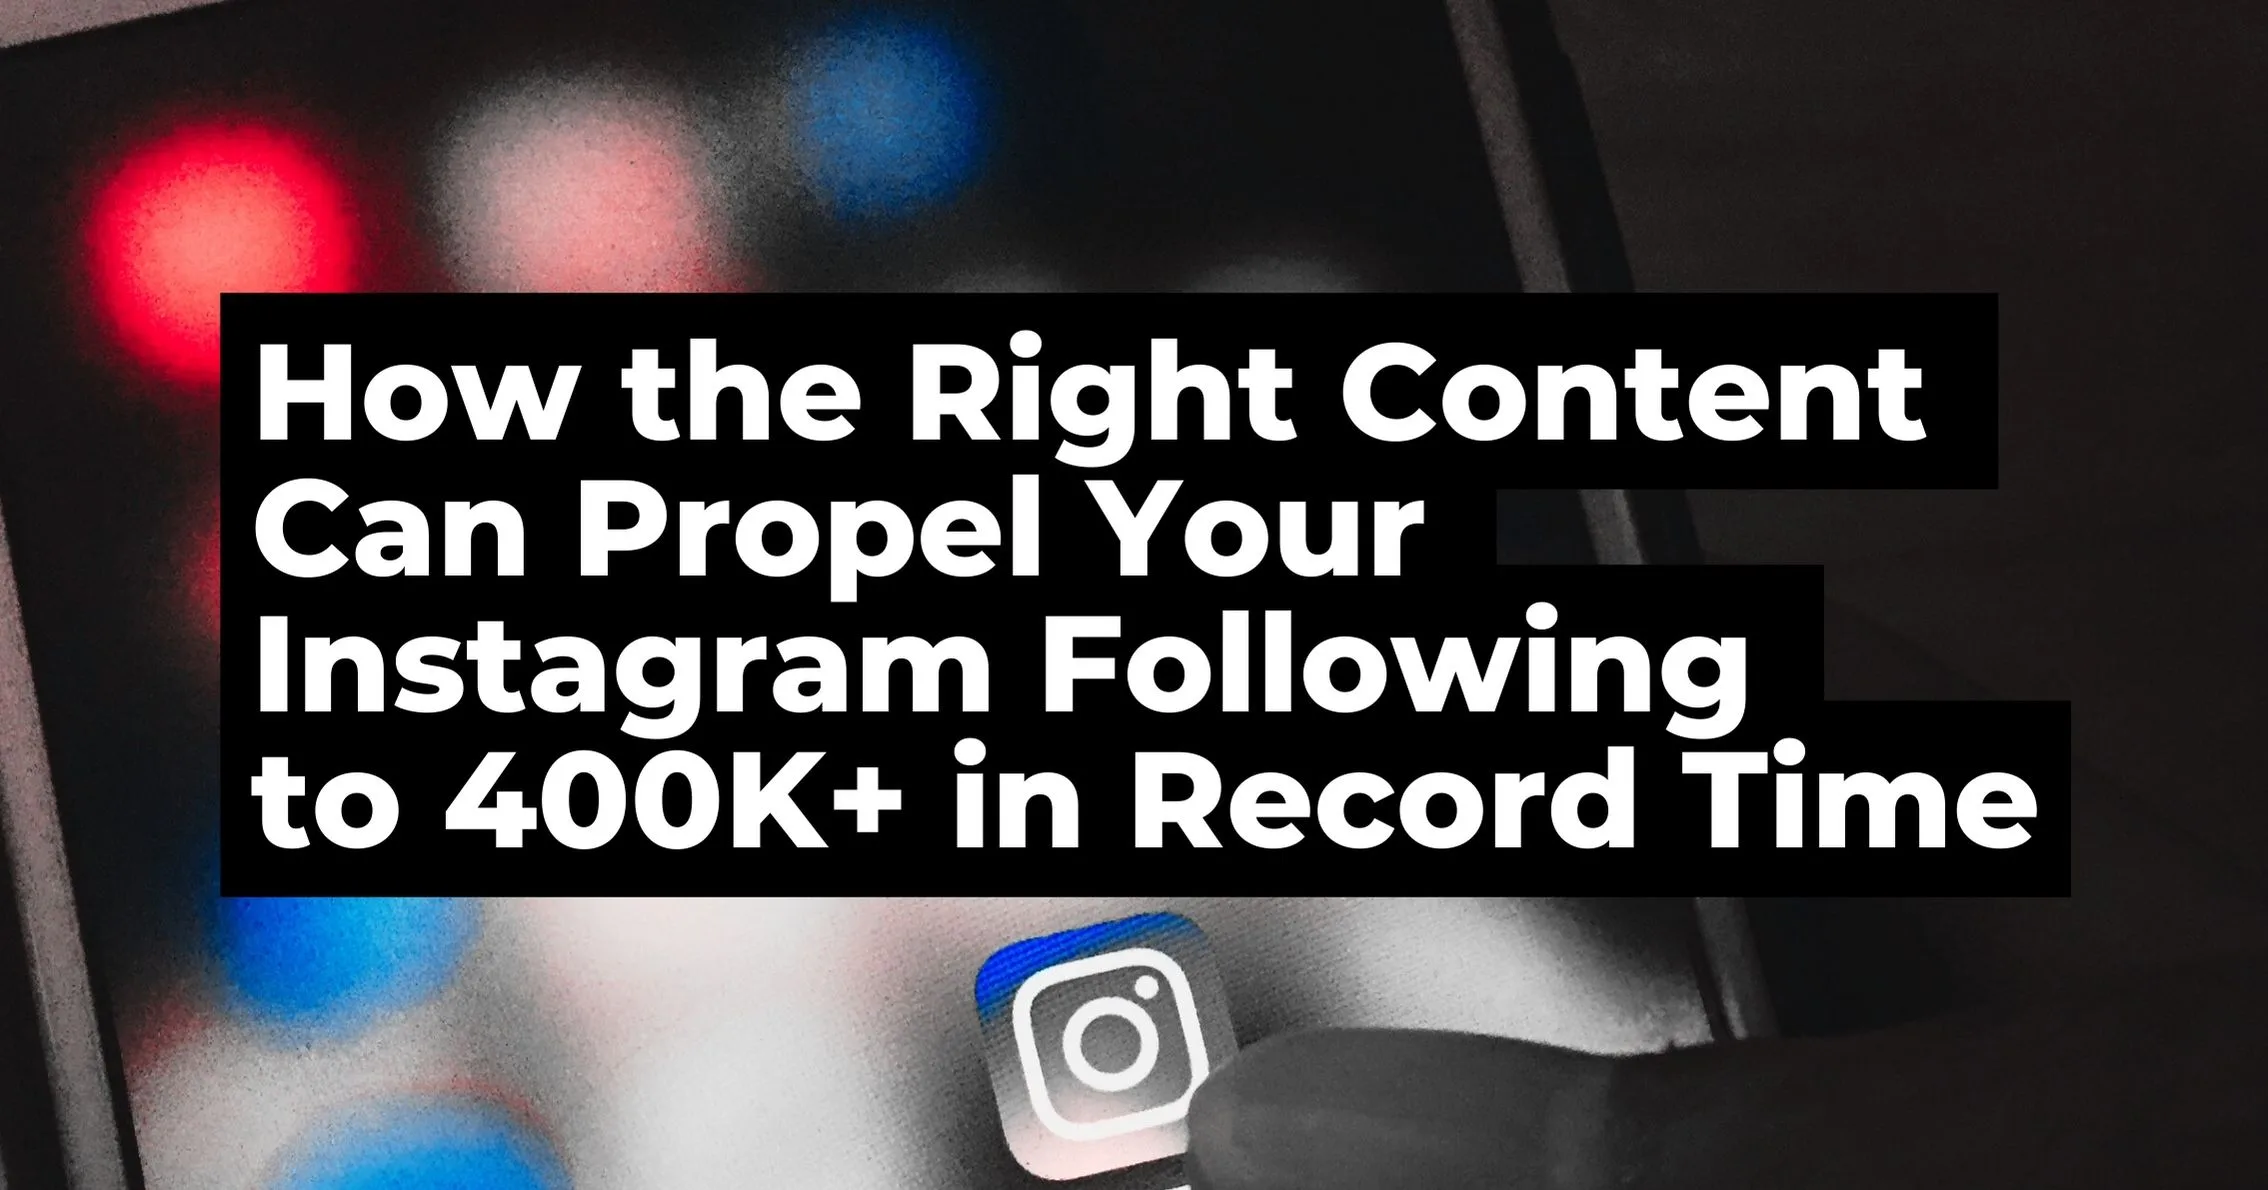 How the Right Content Can Propel Your Instagram Following to 400K+ in Record Time